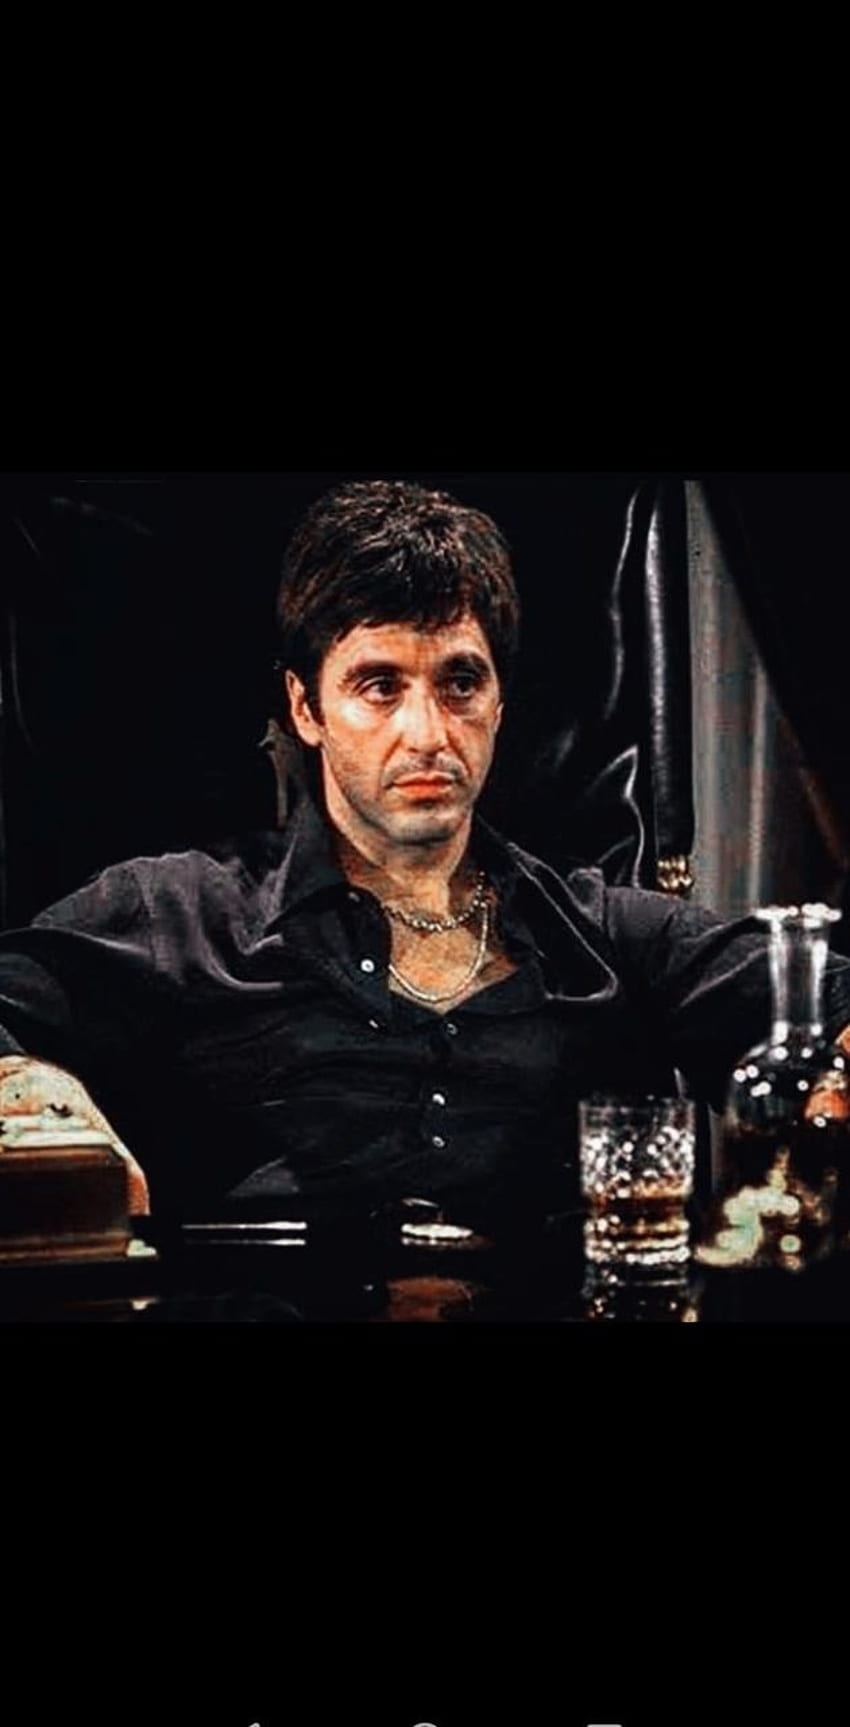 1280x2120 Resolution Tony Montana Scarface Game iPhone 6 plus Wallpaper   Wallpapers Den